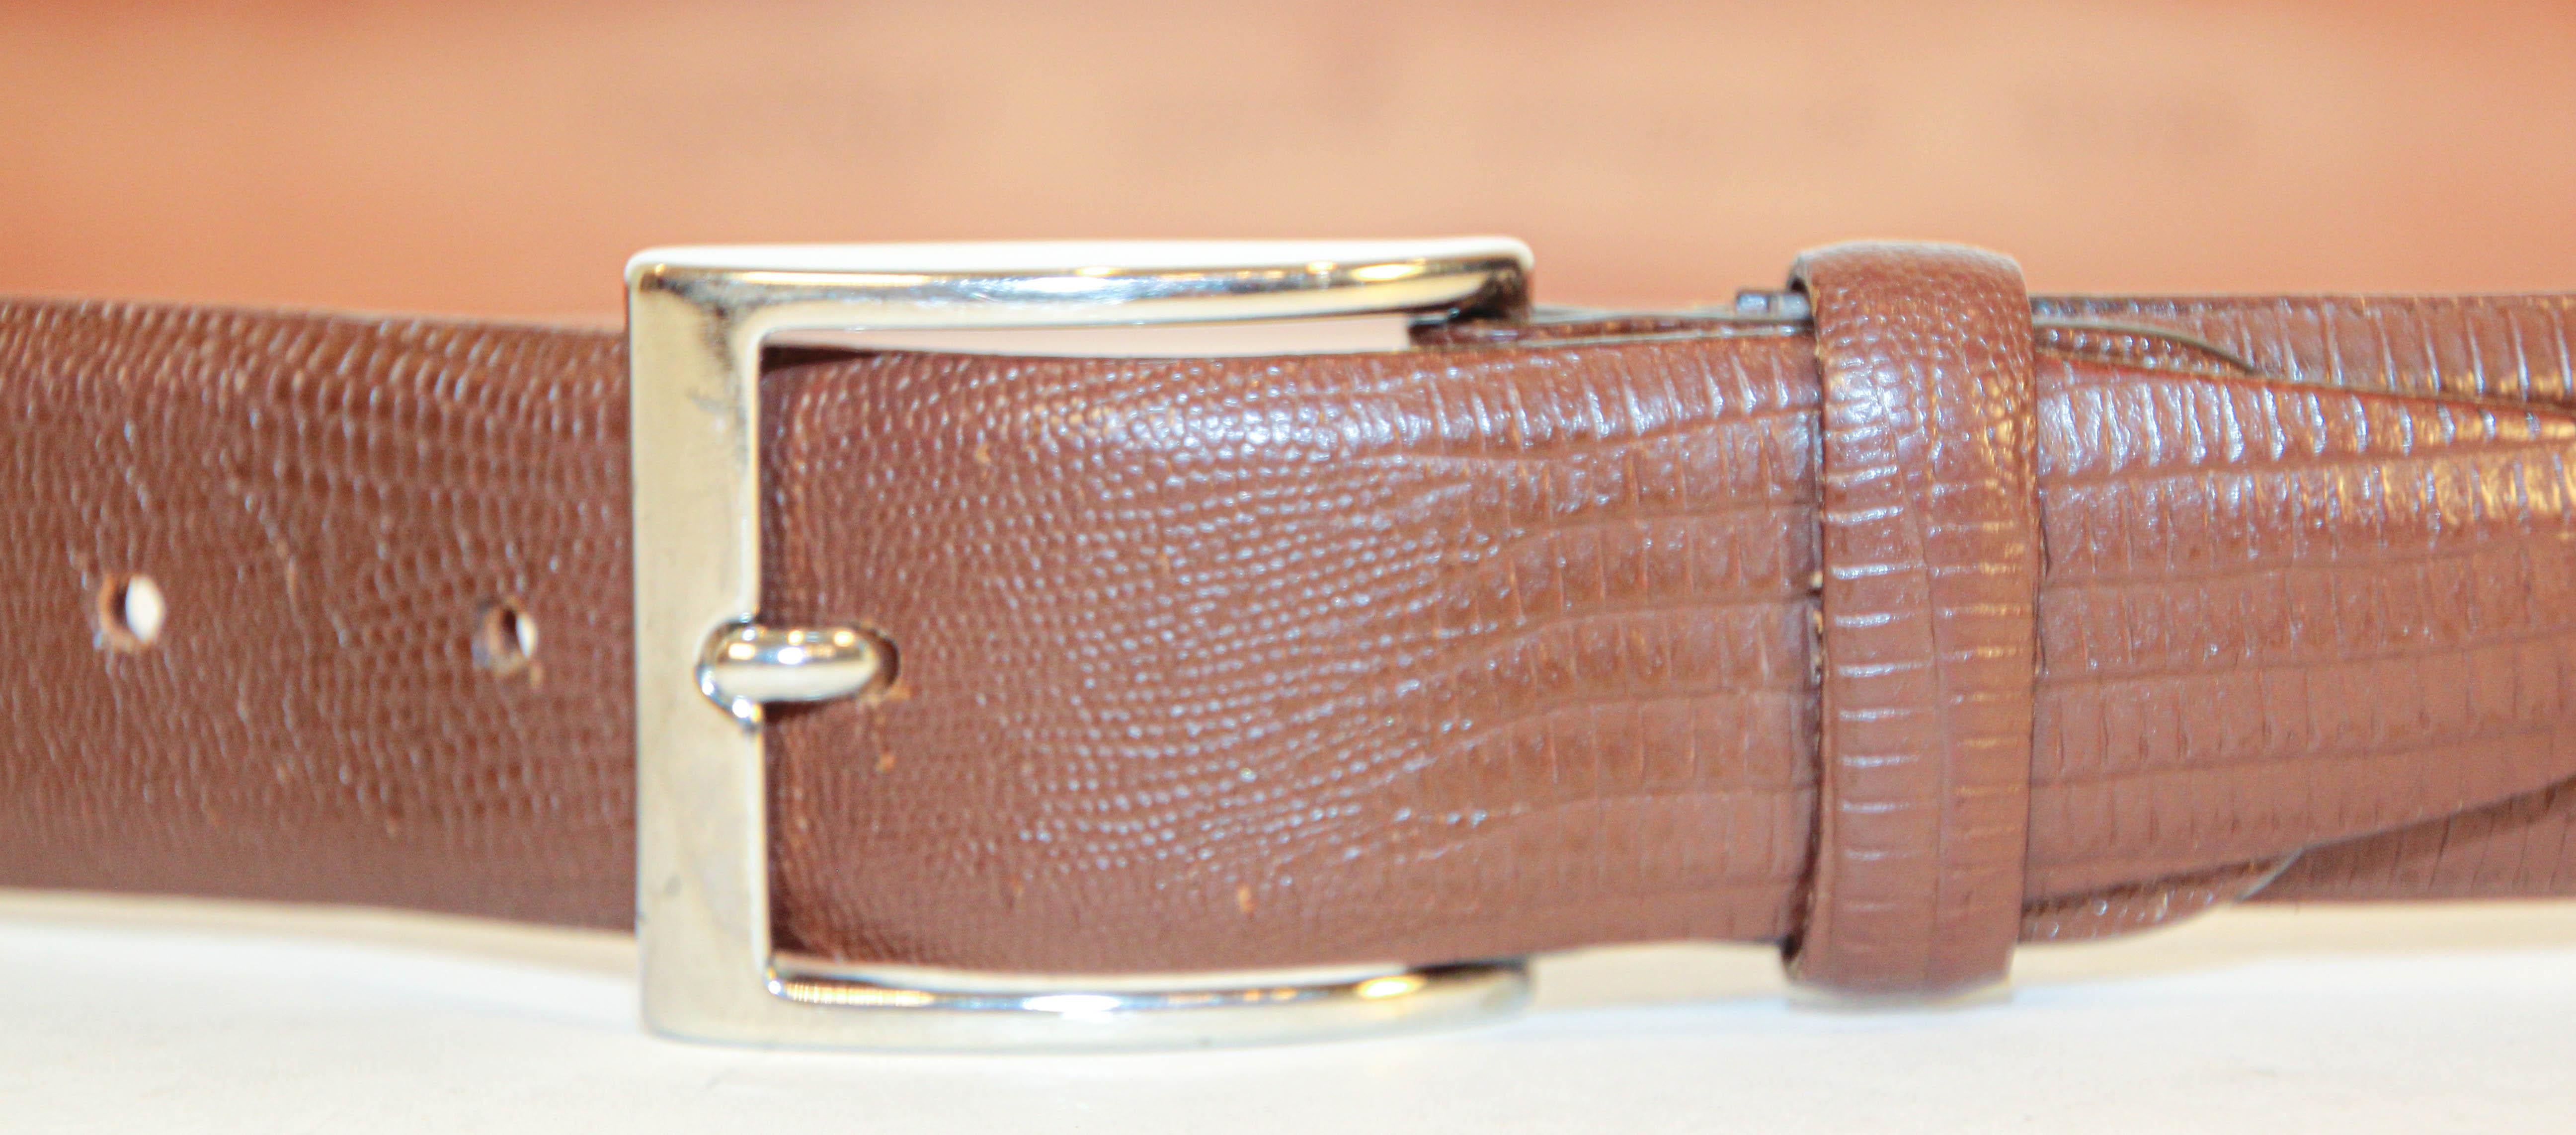 Men's Canali Brown Leather Belt Textured Italy 48/85 In Good Condition For Sale In North Hollywood, CA